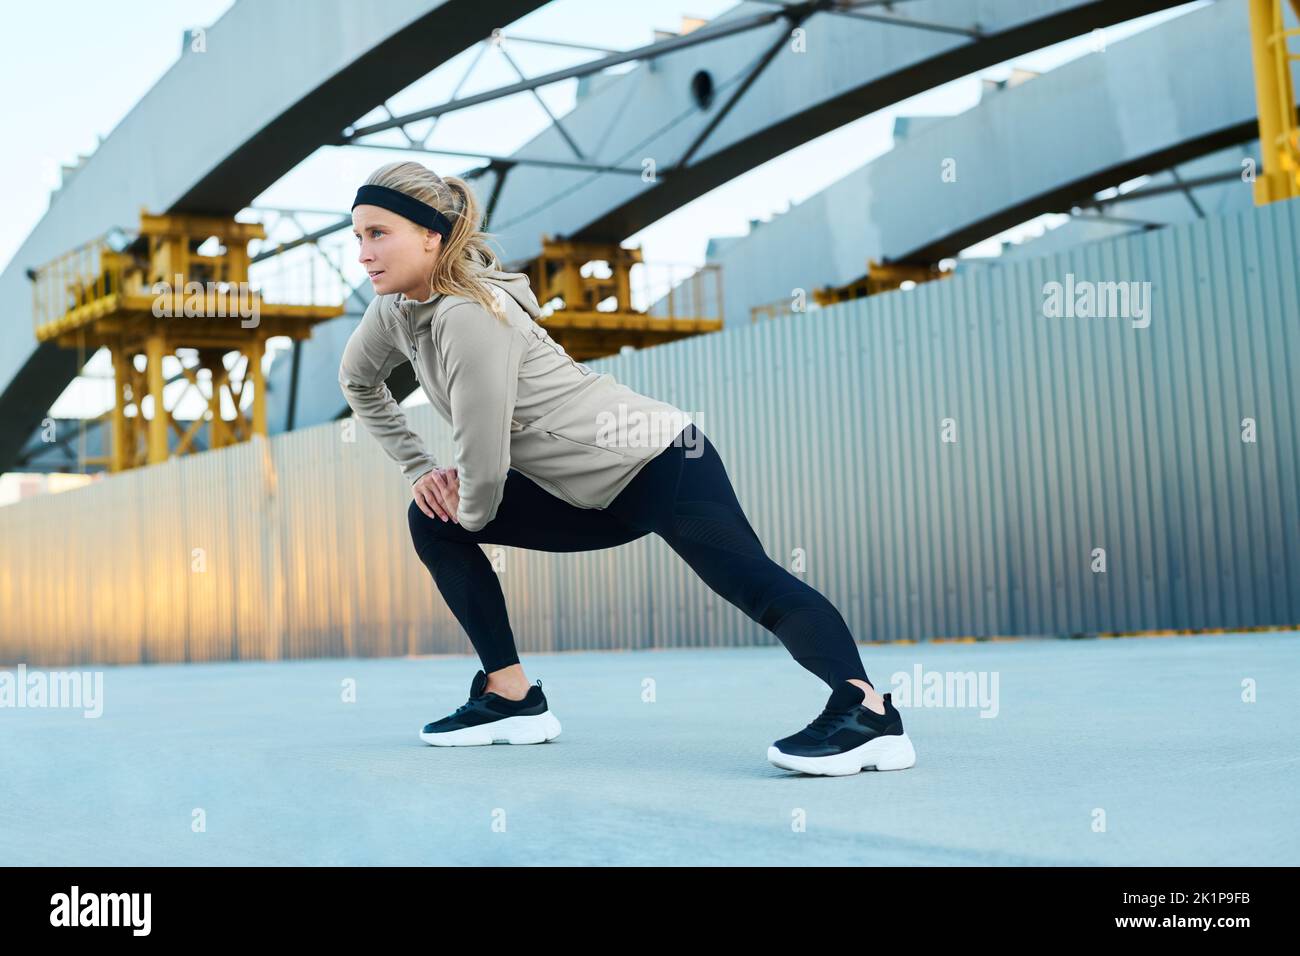 Young fit blond woman in activewear doing physical exercise for leg stretching while standing on asphalt against modern architecture Stock Photo